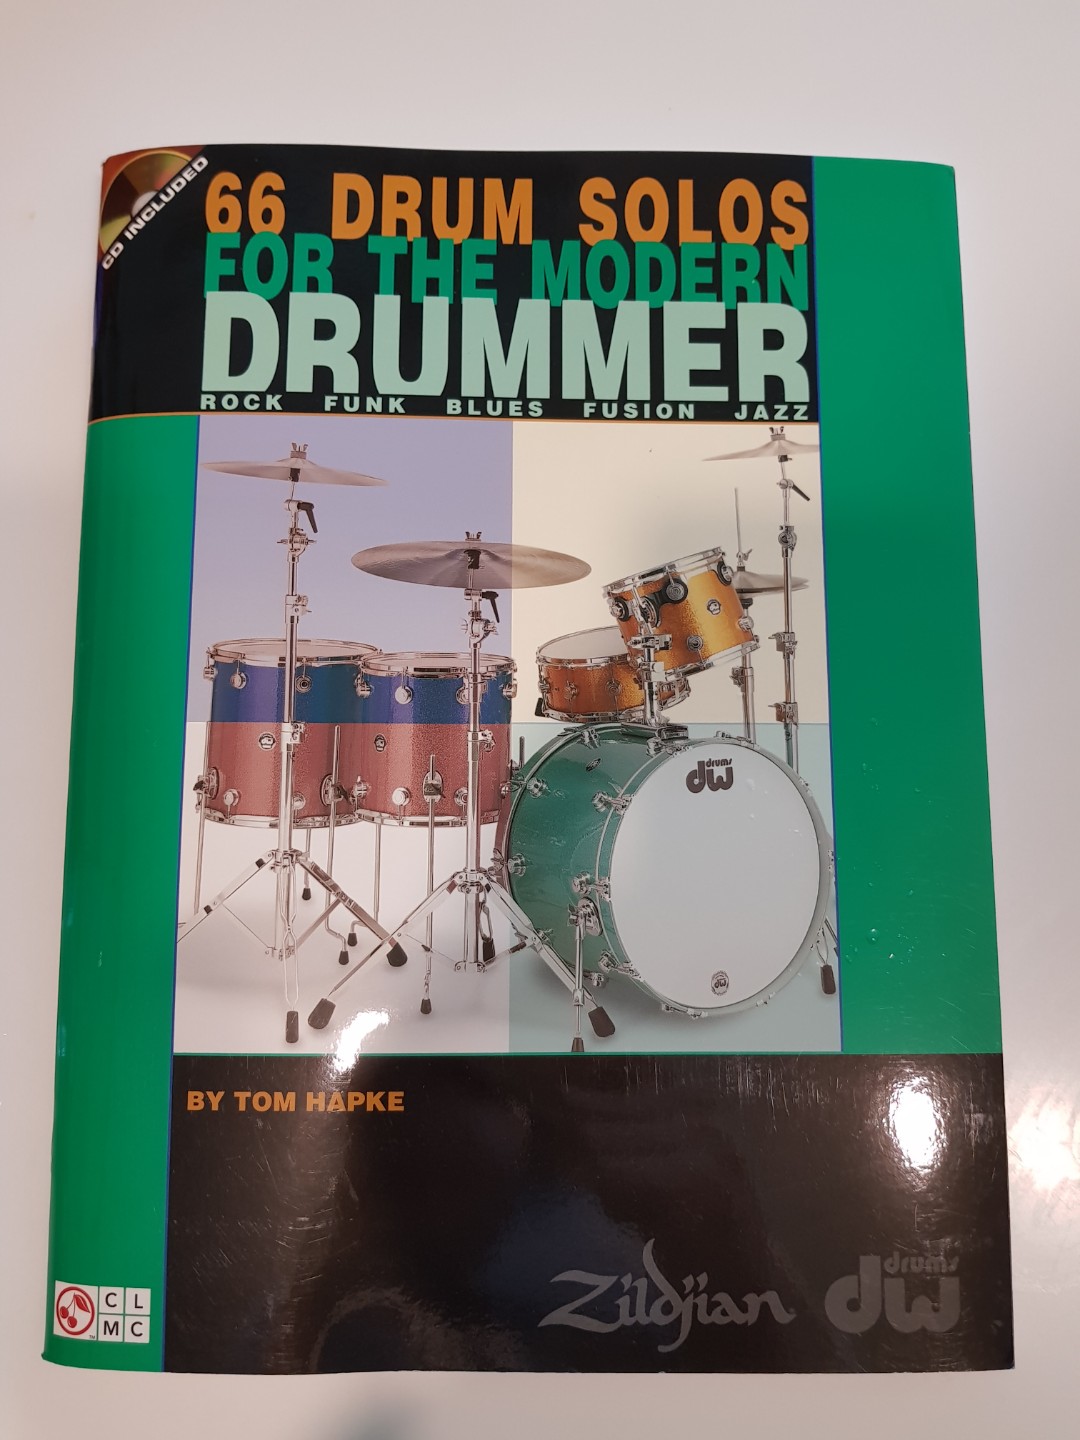 66 drum solos for the modern drummer by tom hapke